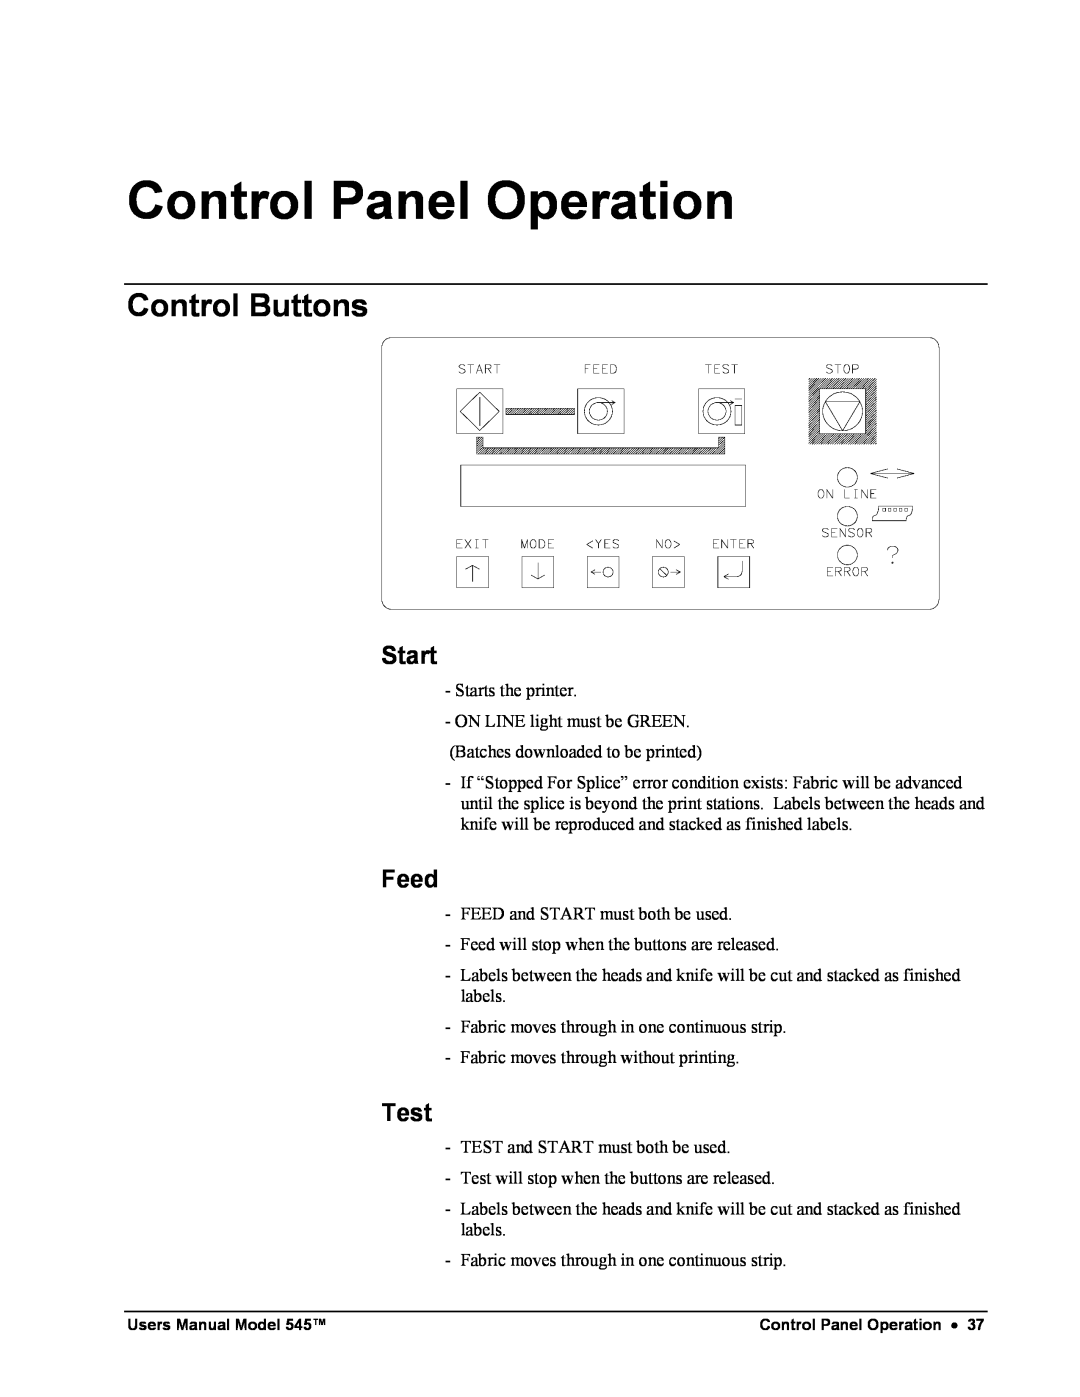 Paxar 545 user manual Control Panel Operation, Control Buttons, Start, Feed, Test 